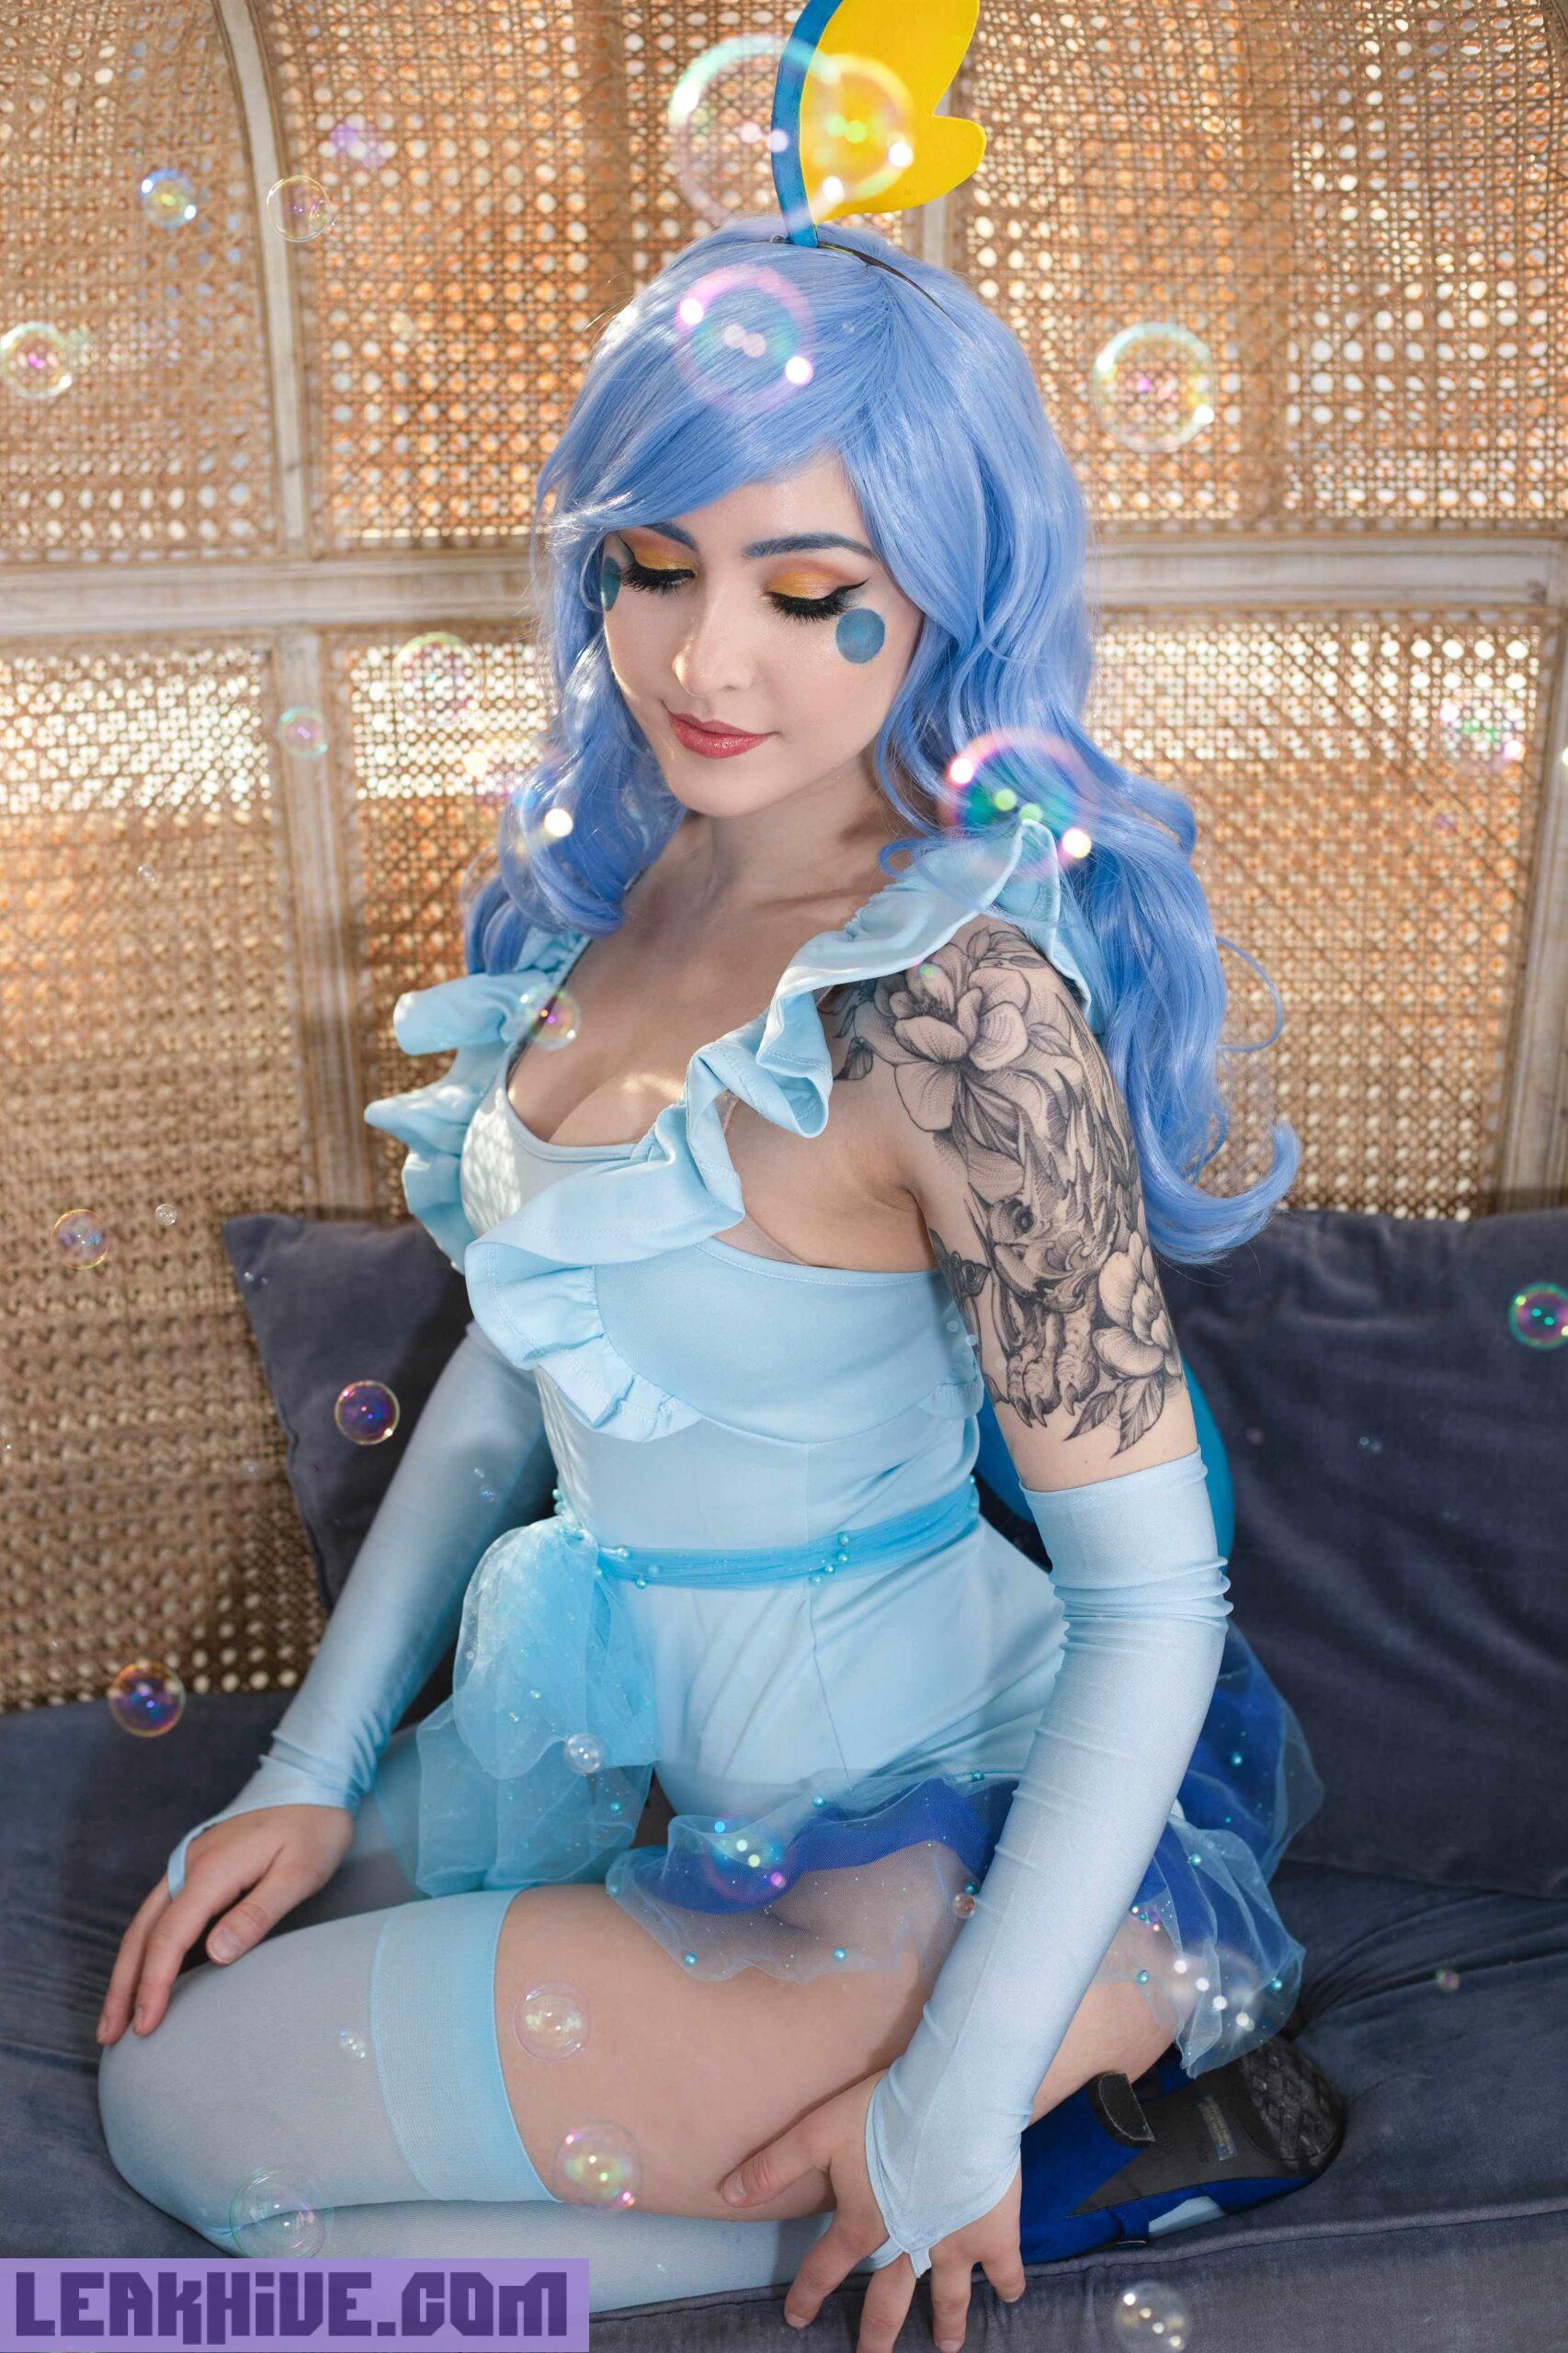 1650066313 296 Luxlo Cosplay Sobble 20 scaled